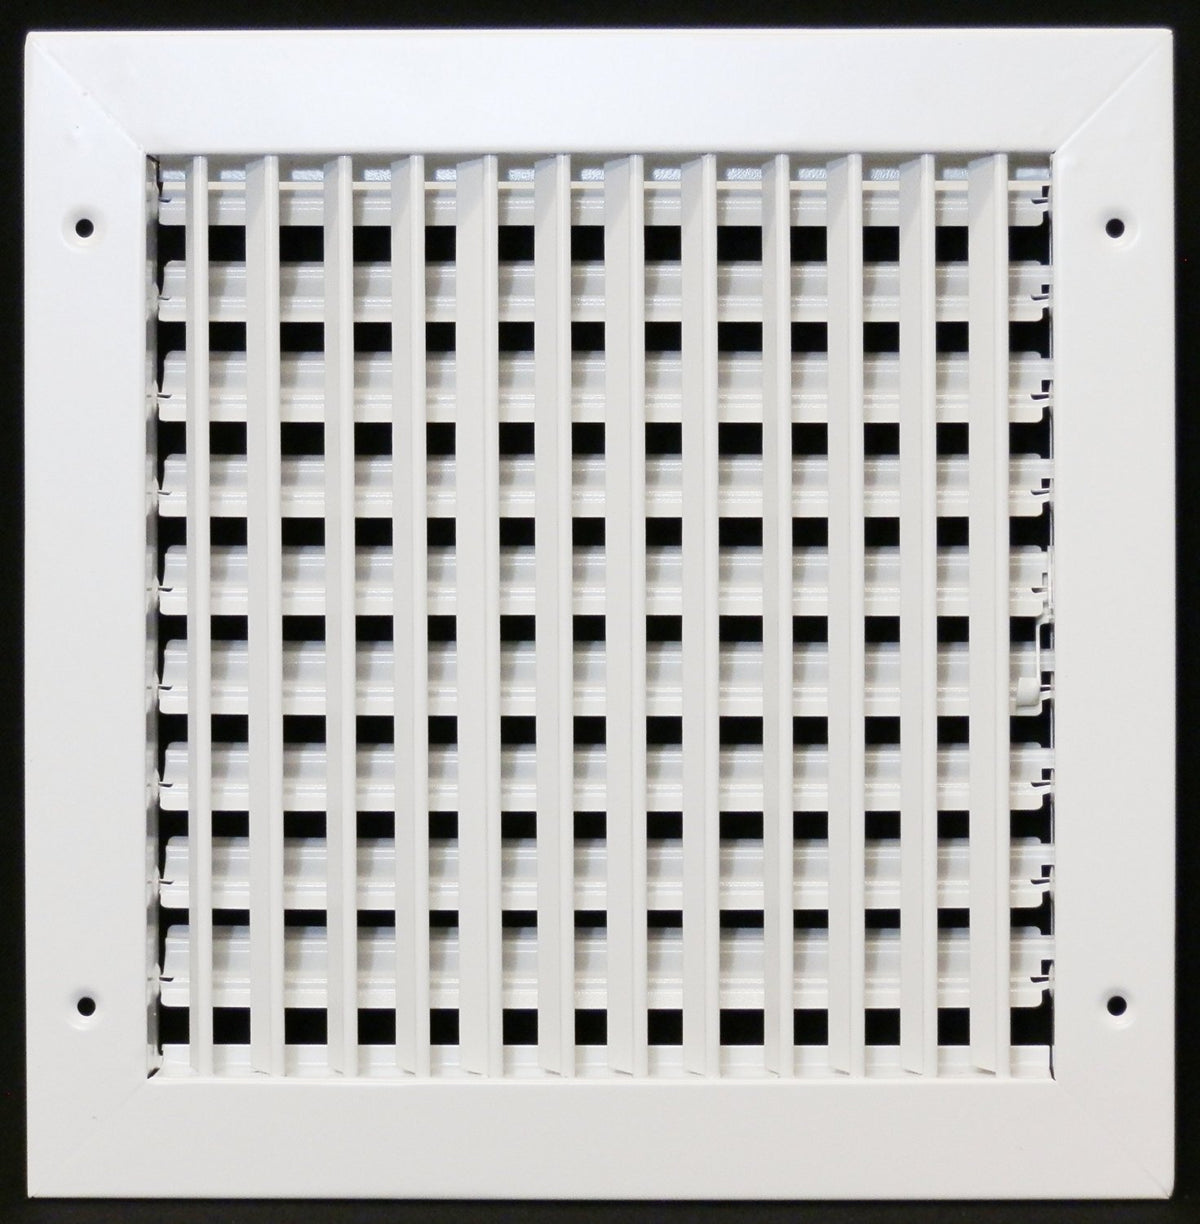 16&quot; X 16&quot; ADJUSTABLE AIR SUPPLY DIFFUSER - HVAC Vent Duct Cover Sidewall or Ceiling